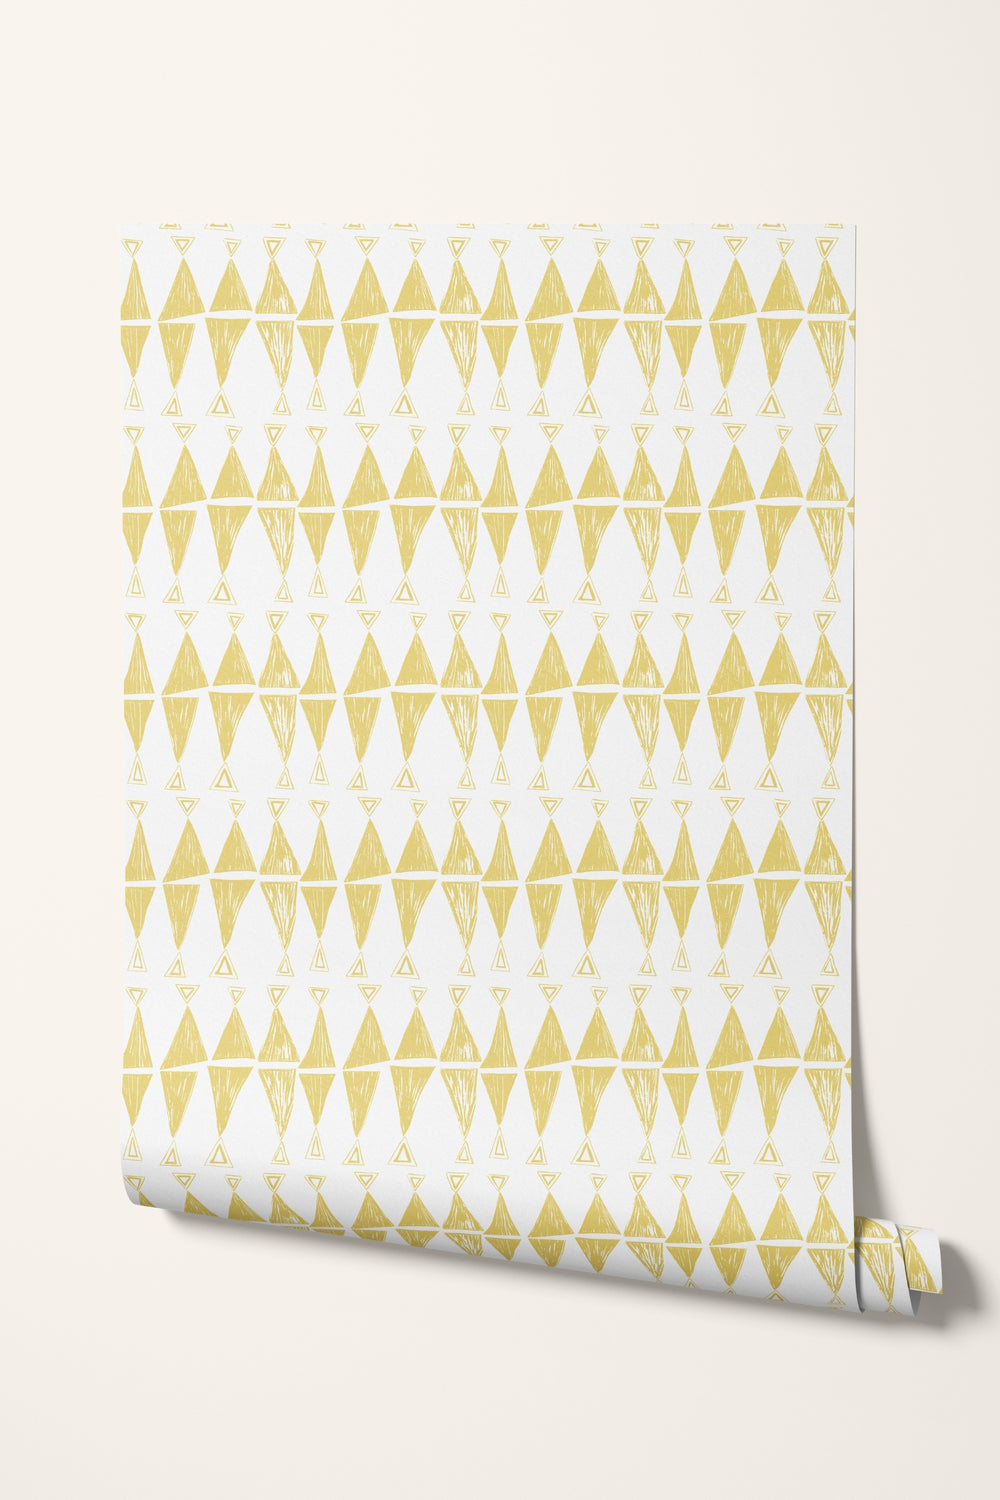 Triangles are my Favourite Shape Wallpaper - Mustard